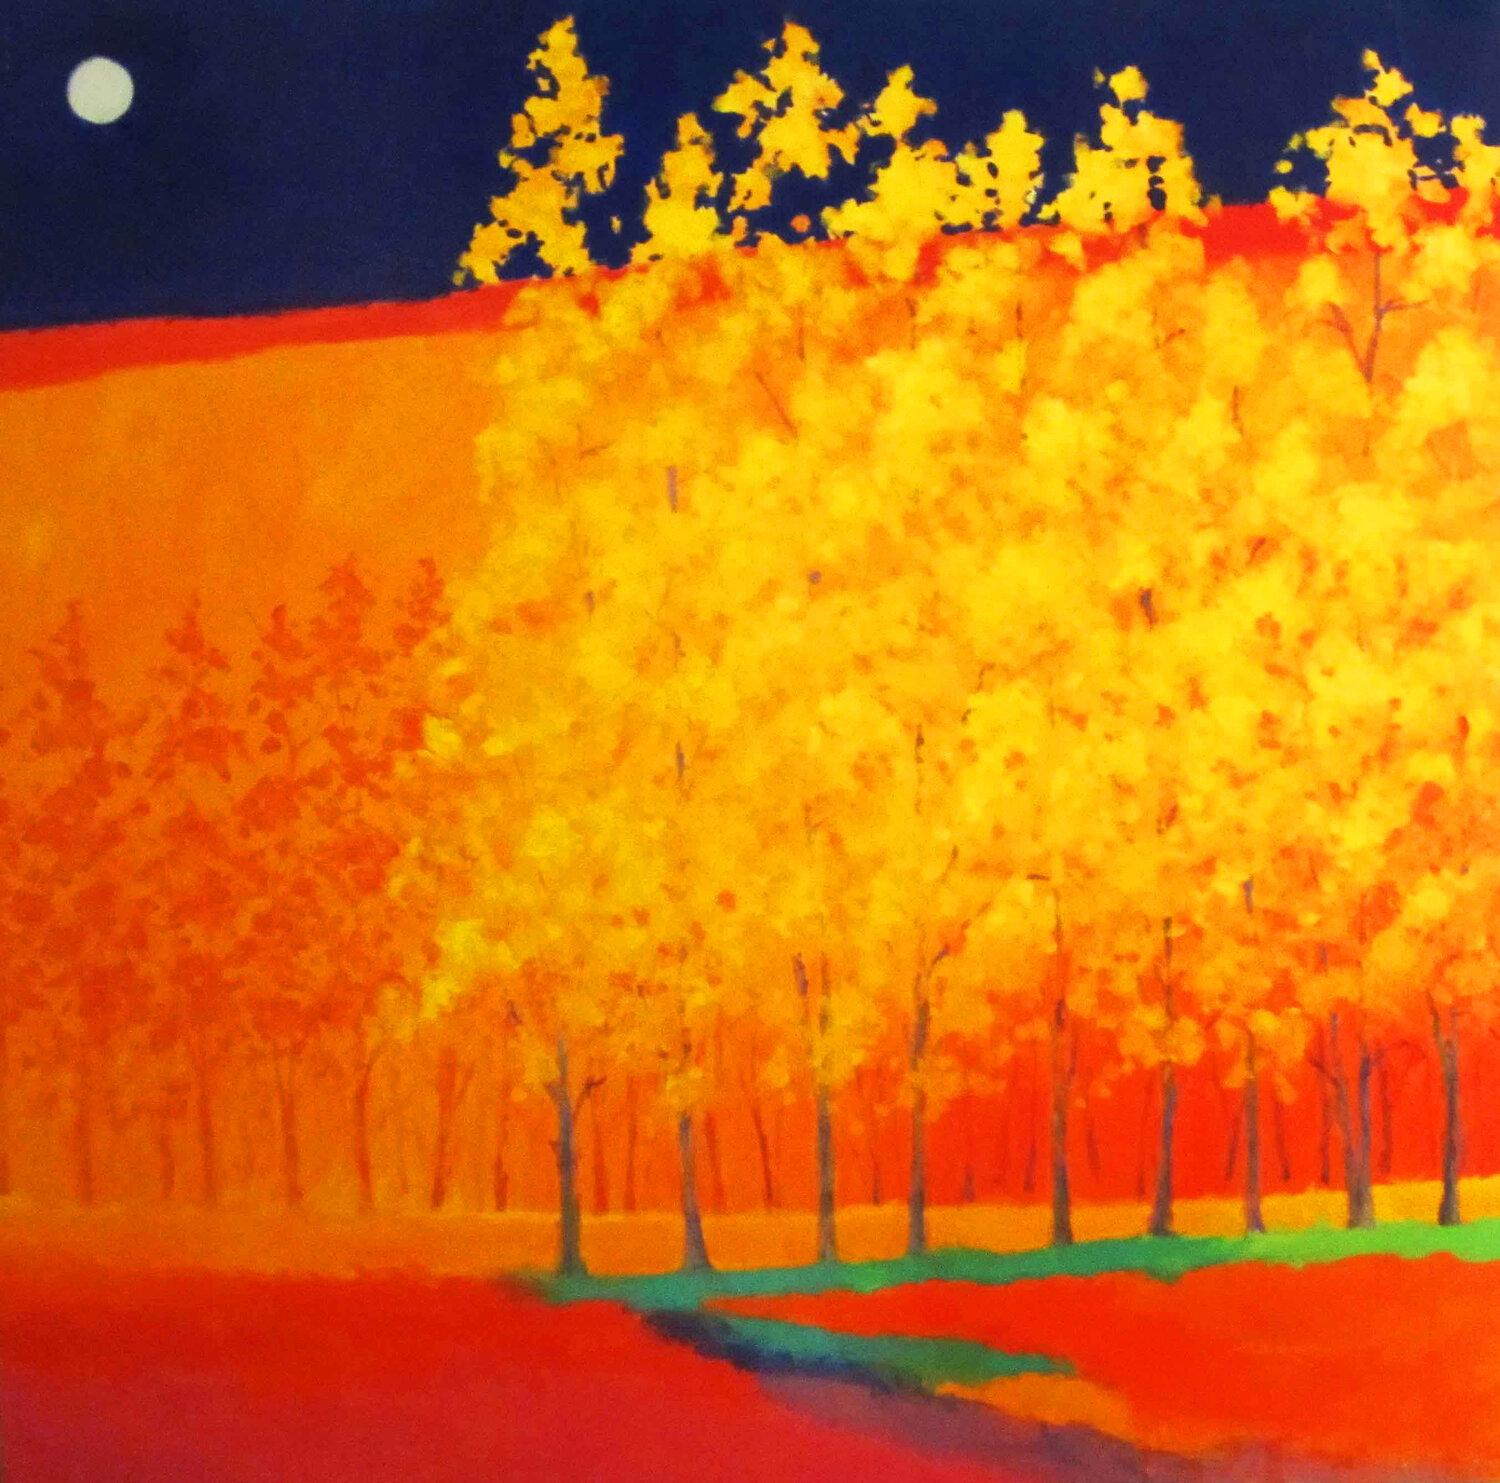 This abstracted forest landscape, "Golden", by artist Charles Emery Ross is a 48x48 acrylic painting on canvas depicting a colorful and whimsical foliage night time scene. Orange and yellow trees in the foreground lead back into a dark purple